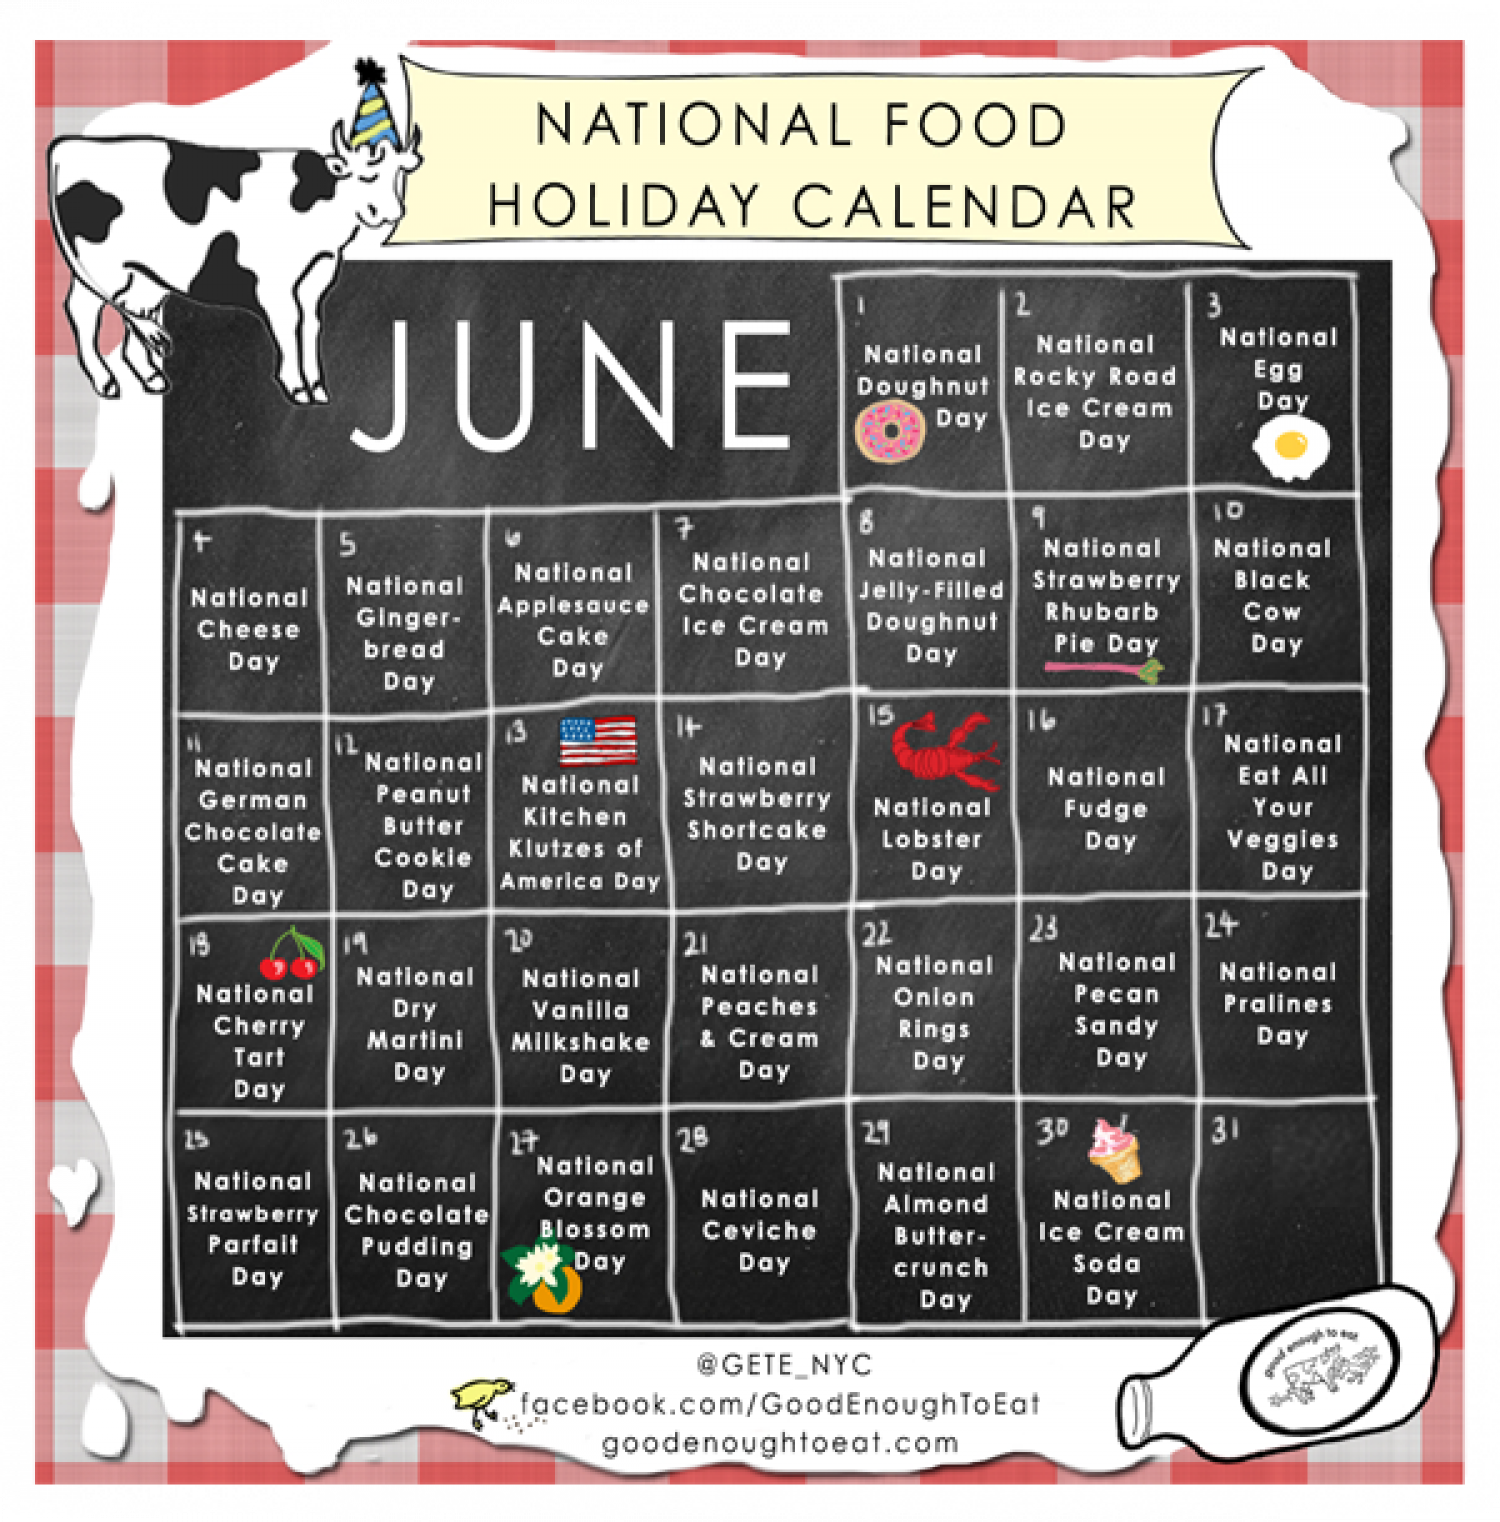 NATIONAL FOOD HOLIDAY CALENDAR - JUNE 2013 Infographic